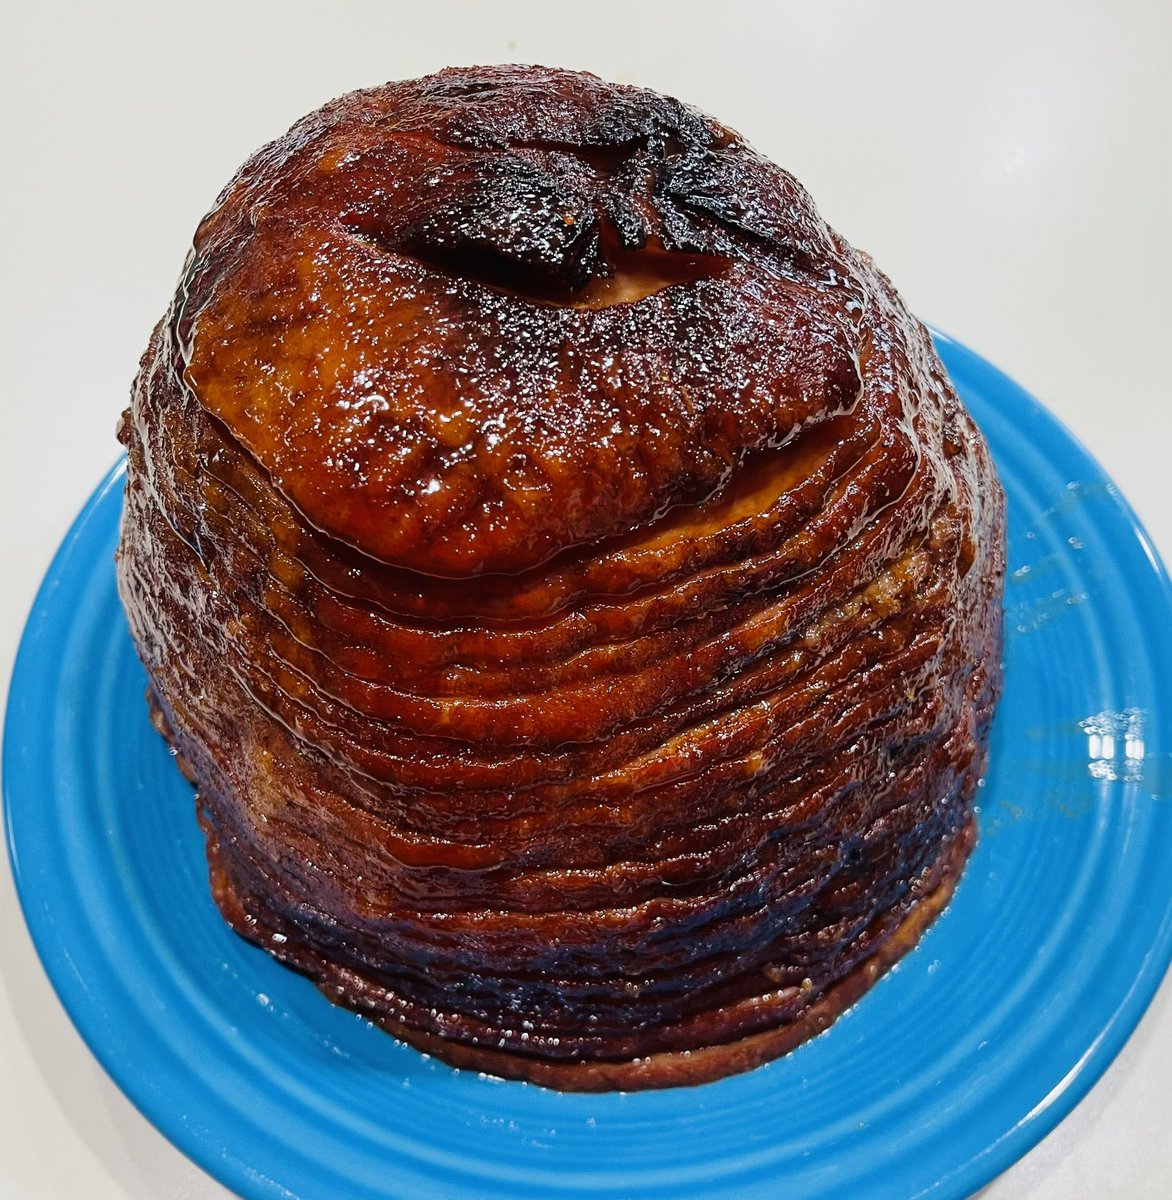 Too cold #ArcticBlast for the ham on the smoker so did it in the oven and it turned out good!!  The smoker is better but this is still very tasty!!😋😋🎄🎄@thisgrilllife @sak_shoes @CherryPinkCat @WahmMaam #TheFoodDude #Christmas